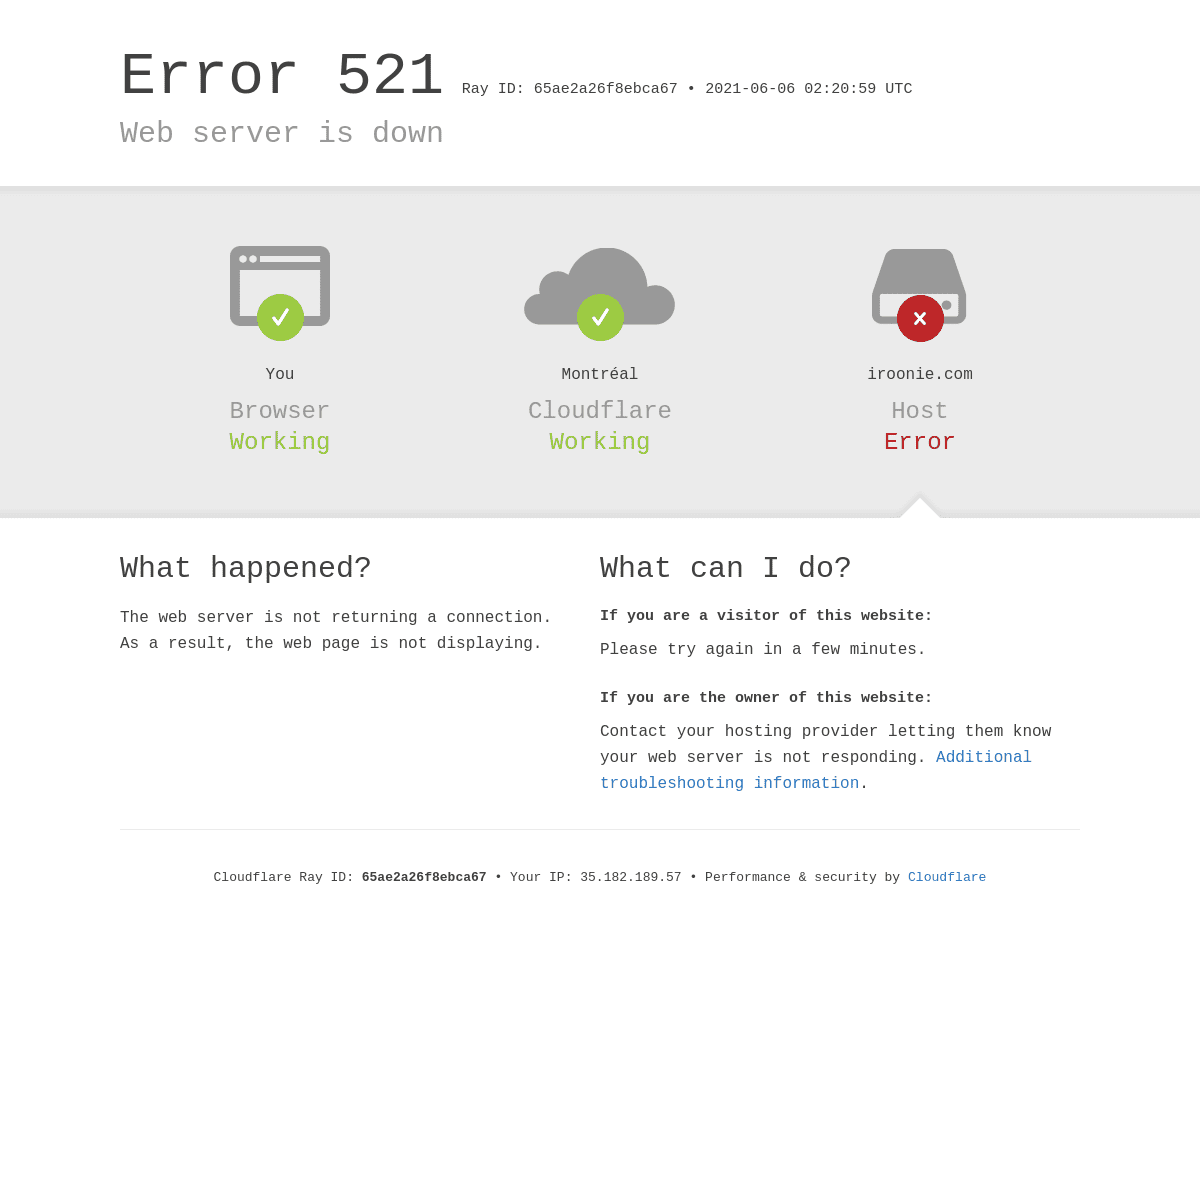 A complete backup of https://iroonie.com